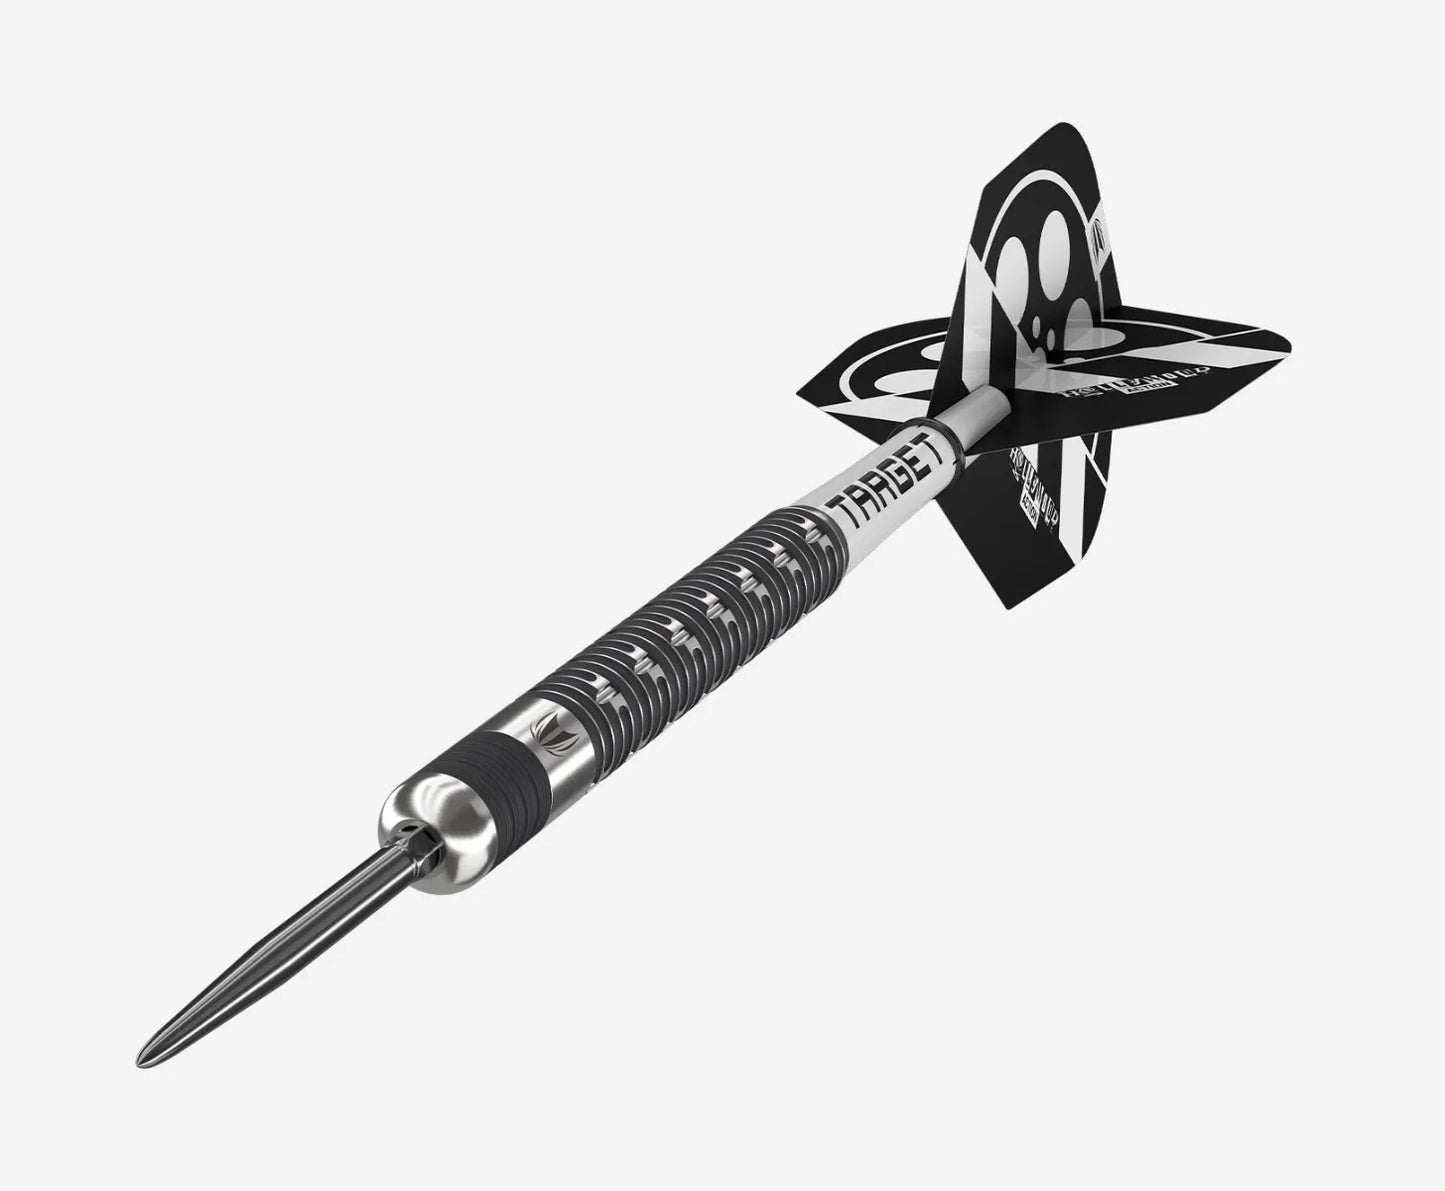 Target Chris Dobey Hollywood Action Swiss Points 90% Steeldarts 22g